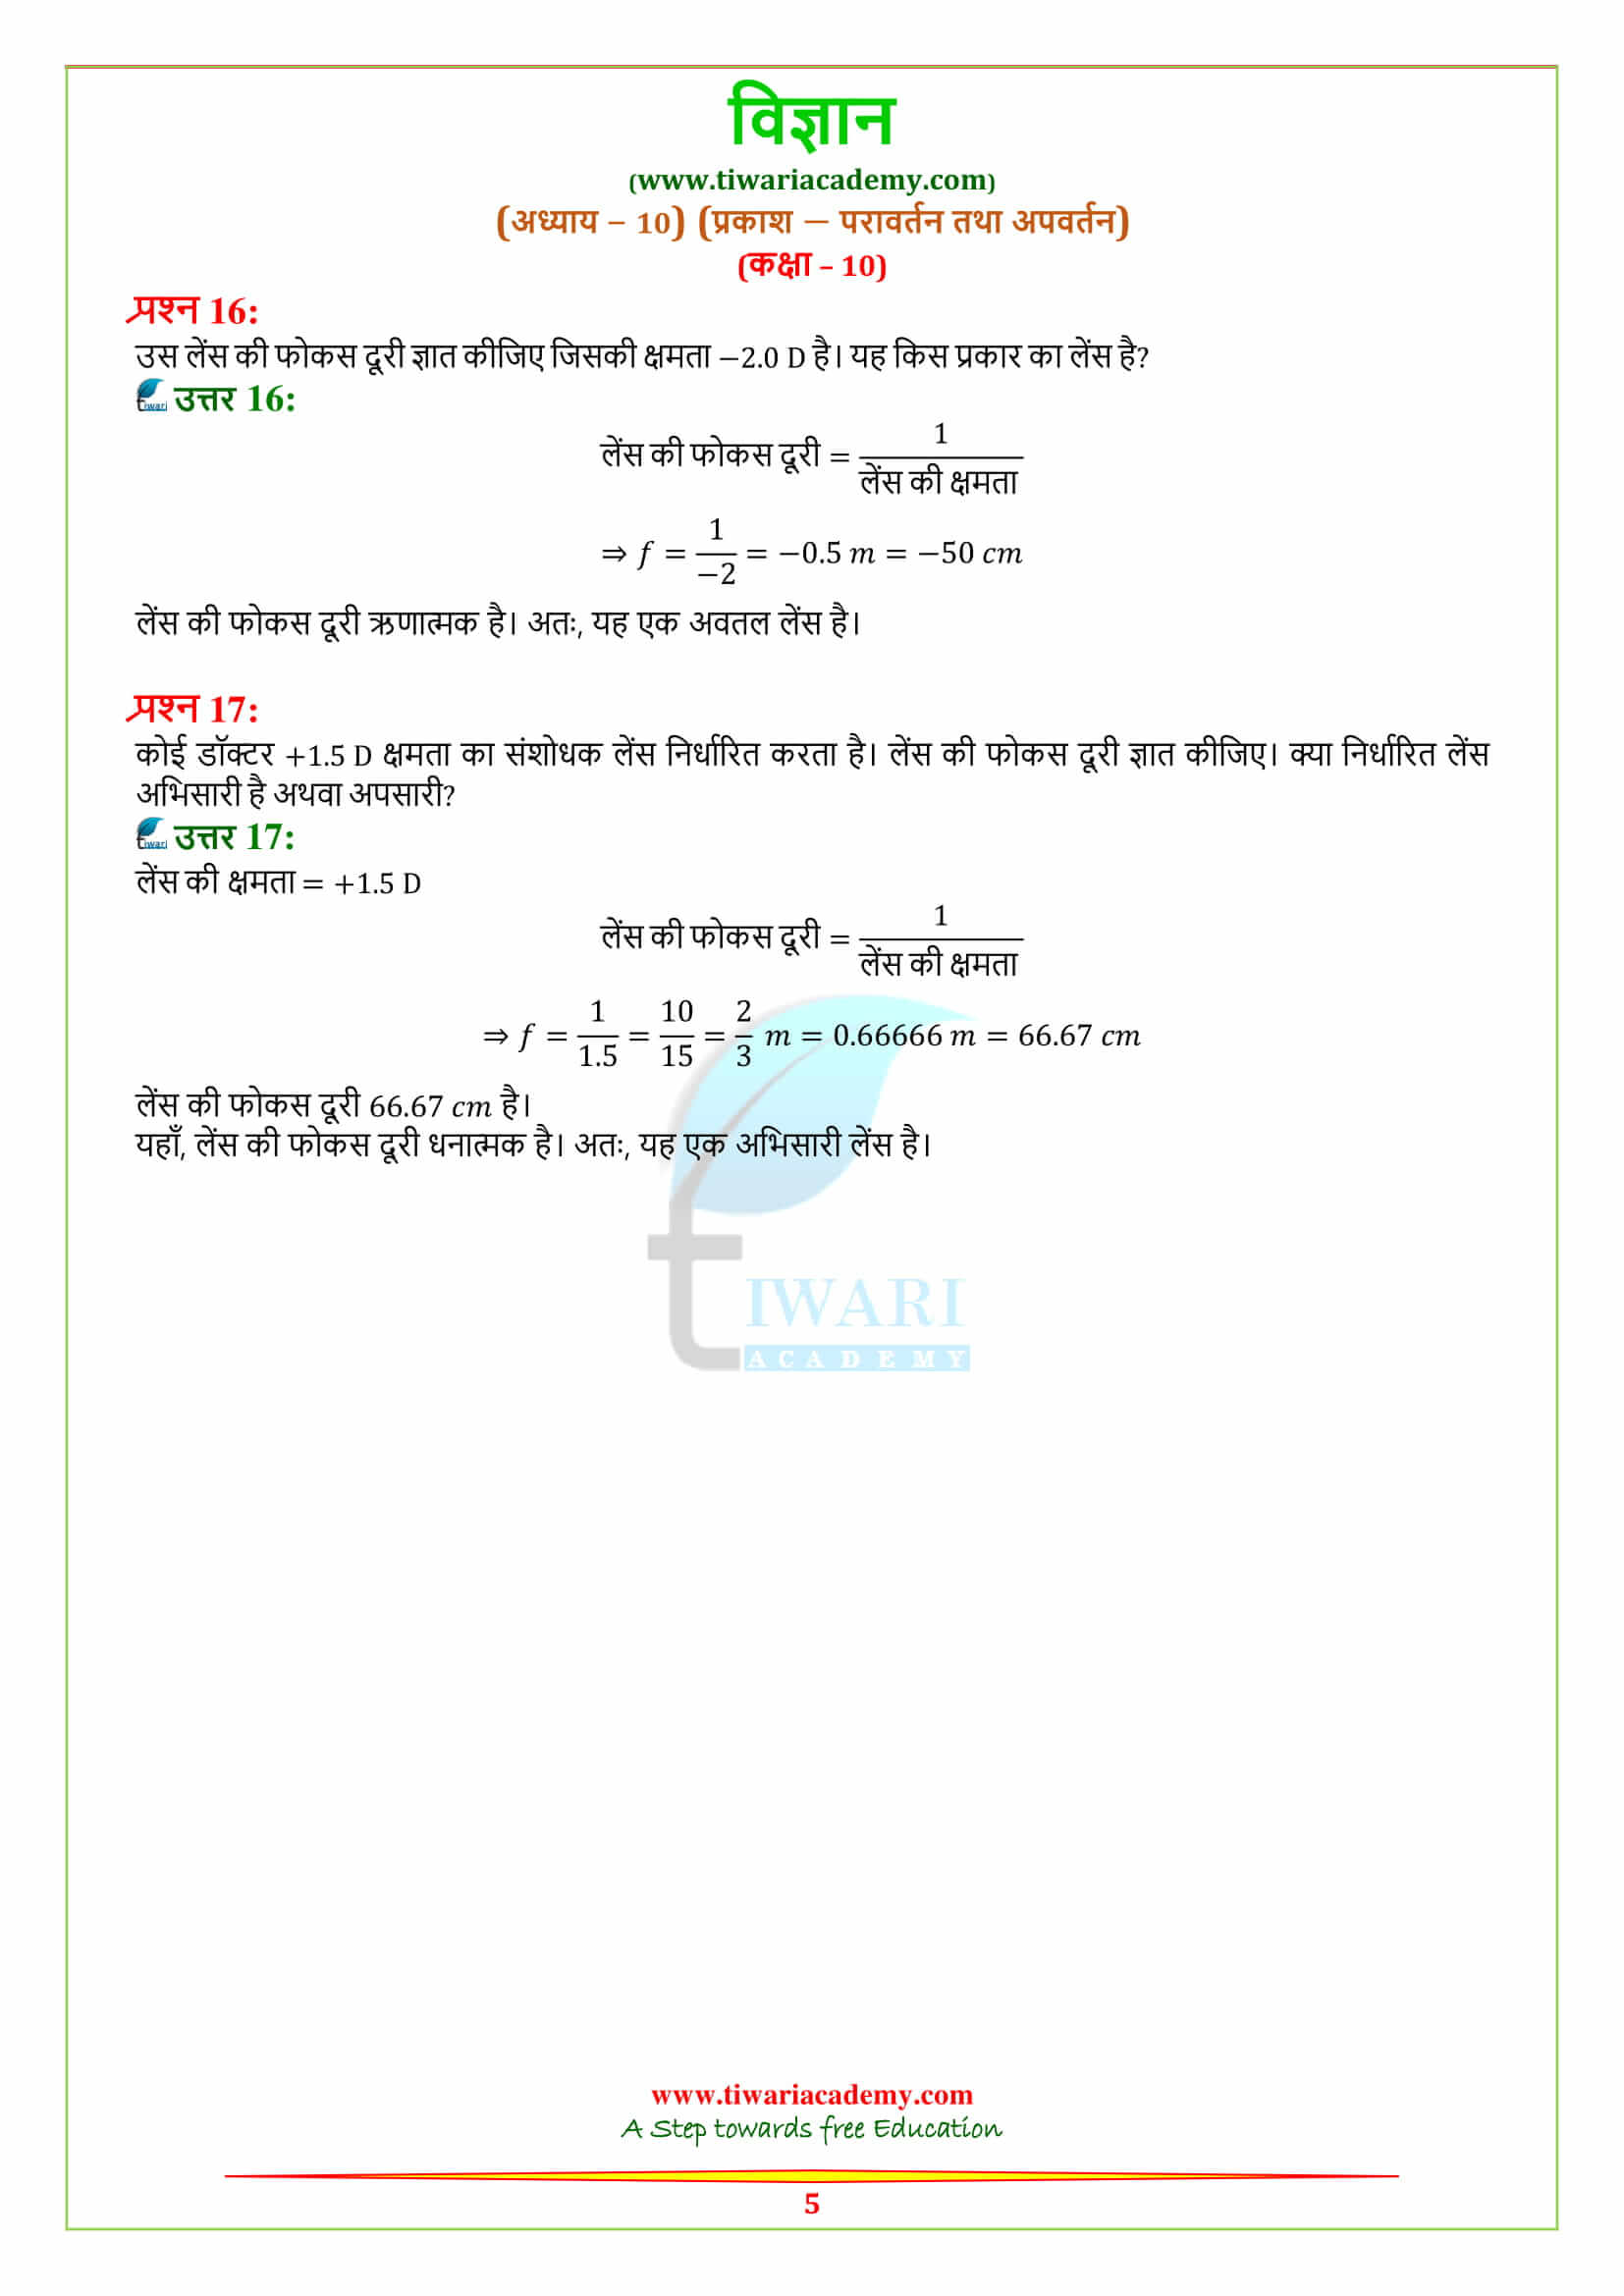 NCERT Solutions for Class 10 Science Chapter 10 guide free